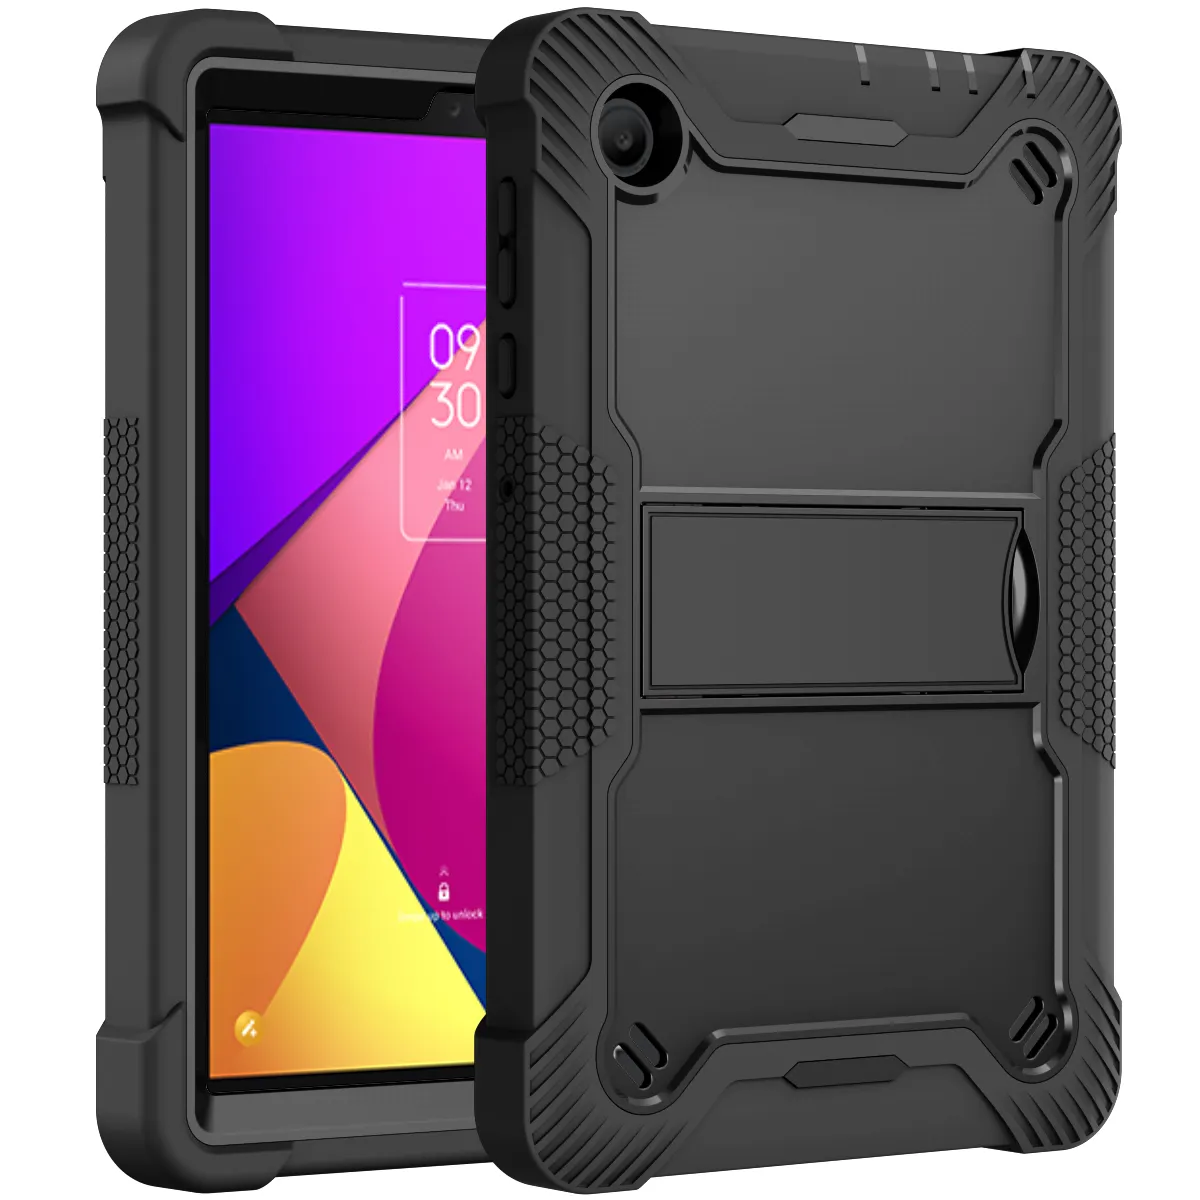 China Factory Wholesale Survivor Kickstand Rugged Tablet Protector Case for Tcl Tab 8 Le Tablet